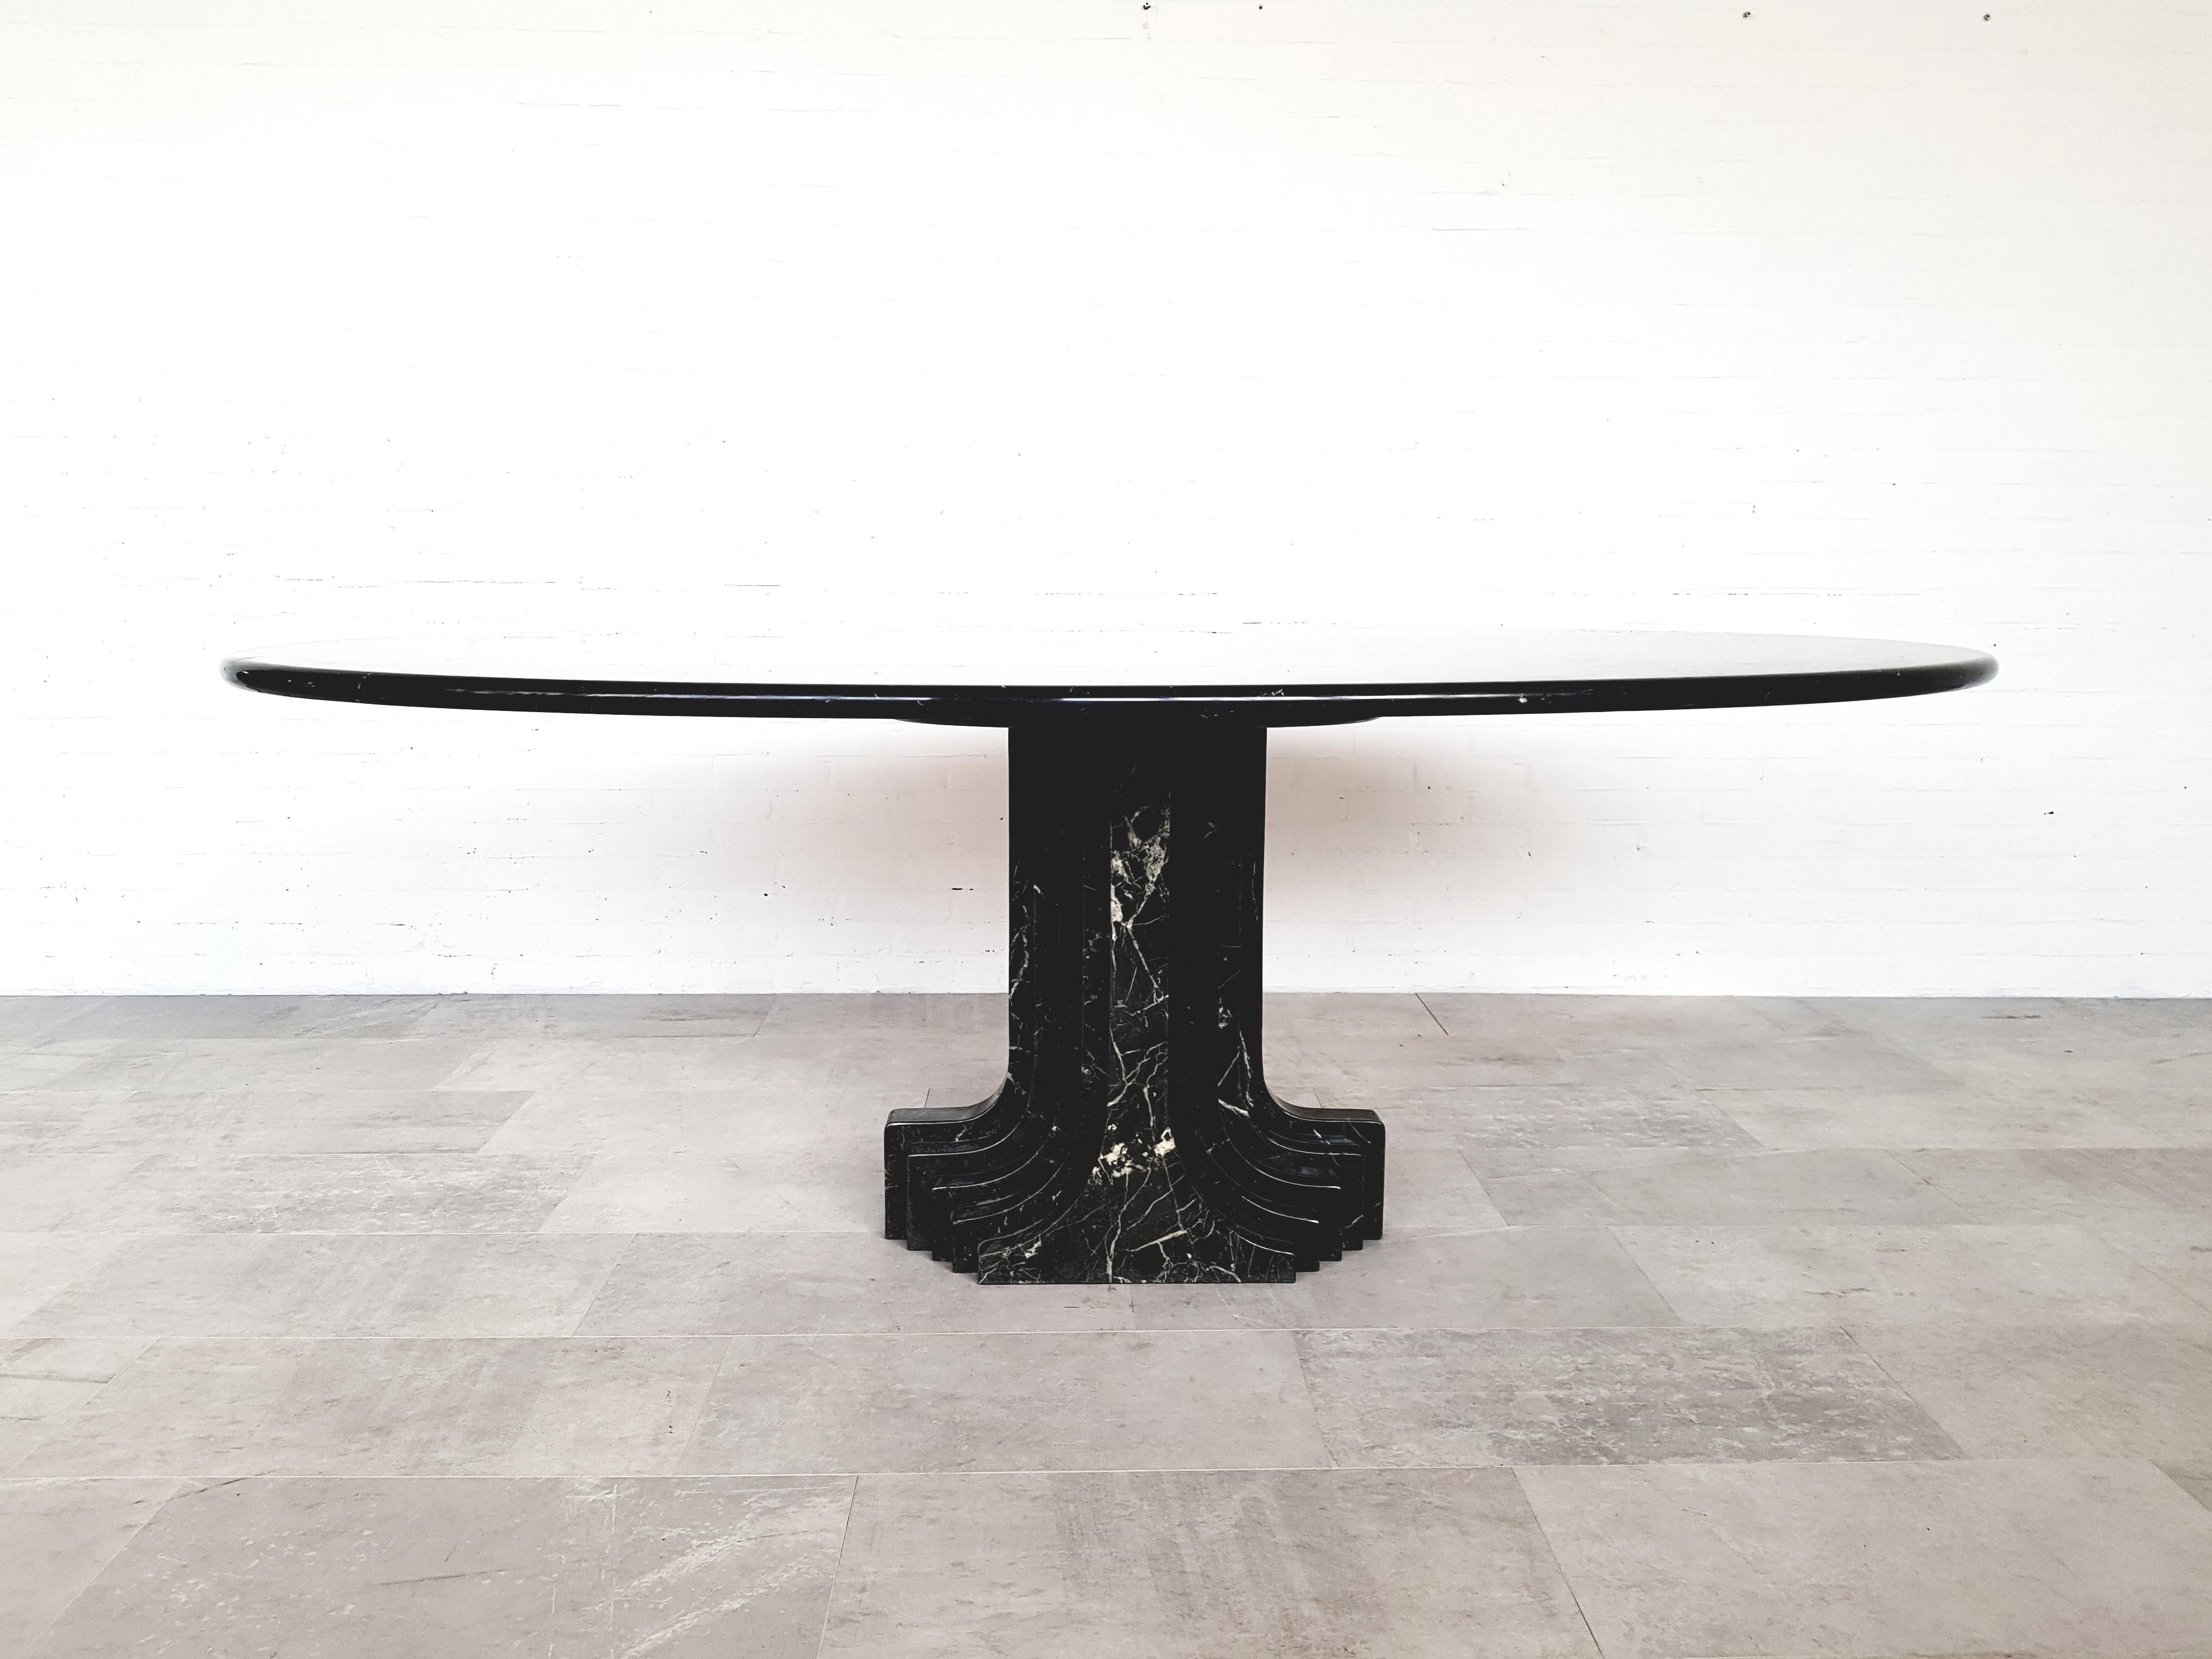 Postmodern dining table in black marble.
Carlo Scarpa, Italy, 1970s.
Fits well in an eclectic Hollywood Regency interior inspired by Mario Bellini, Florence Knoll or Angelo Mangiarotti.